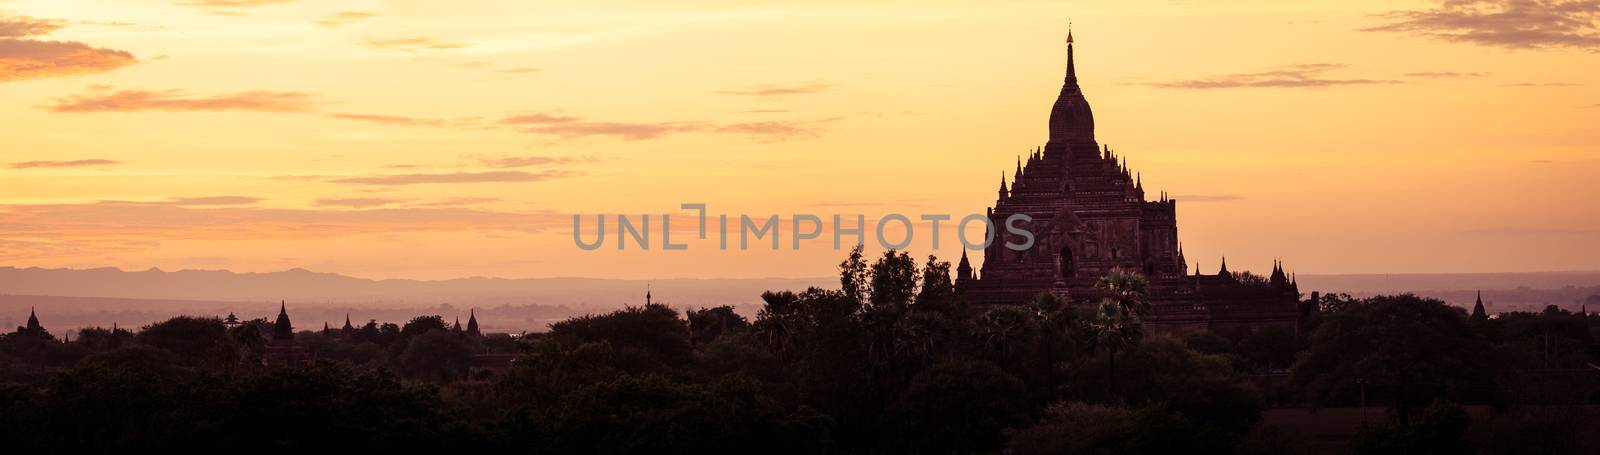 Panoramic landscape view of ancient temples silhouette at sunset by martinm303